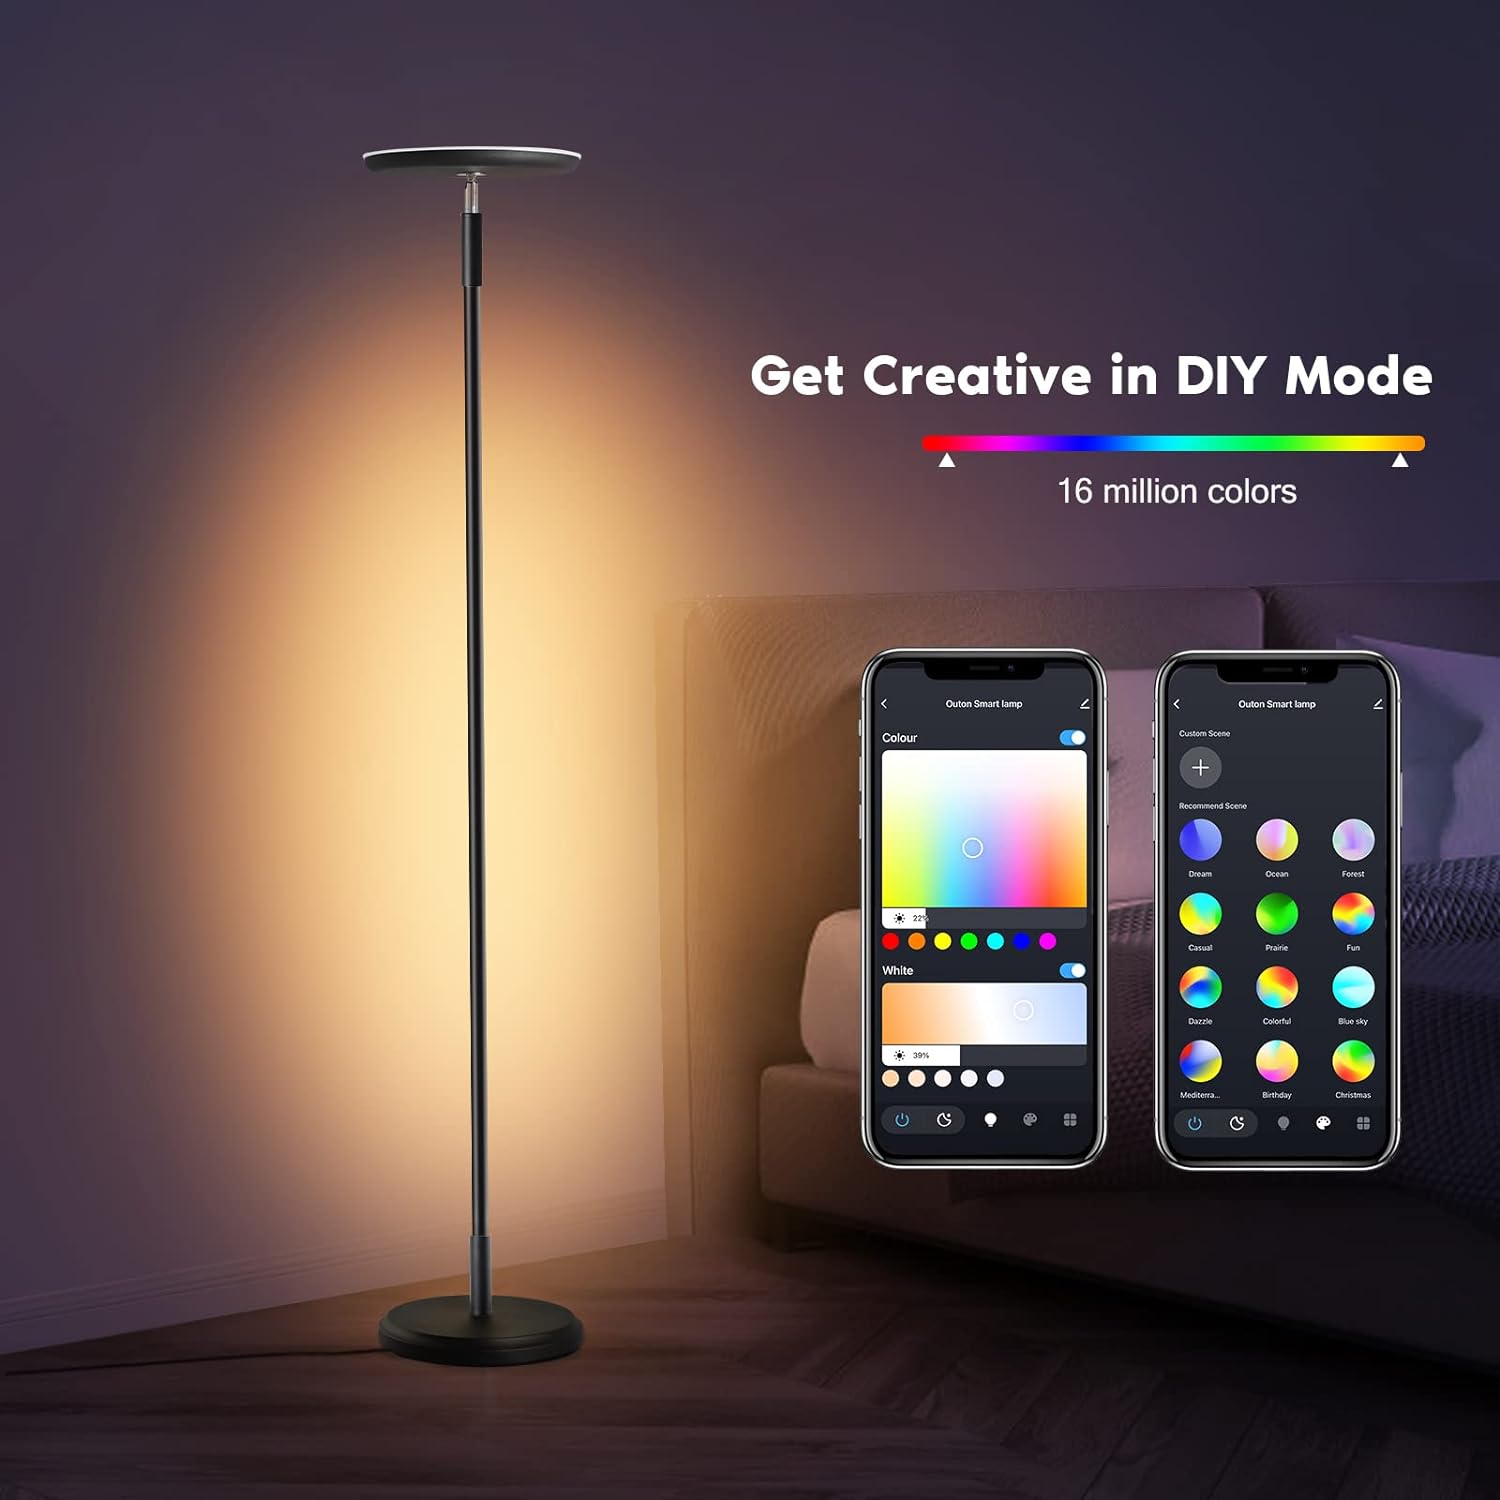 OUTON S1 Floor Lamp, 2-in-1 Smart RGBIC Corner Lamp & 30W/3000LM Bright LED Torchiere Floor Lamp, WiFi-App Control, 16 Million DIY Colors, Music Sync, Standing lamp for Living Room Bedroom Gaming Room